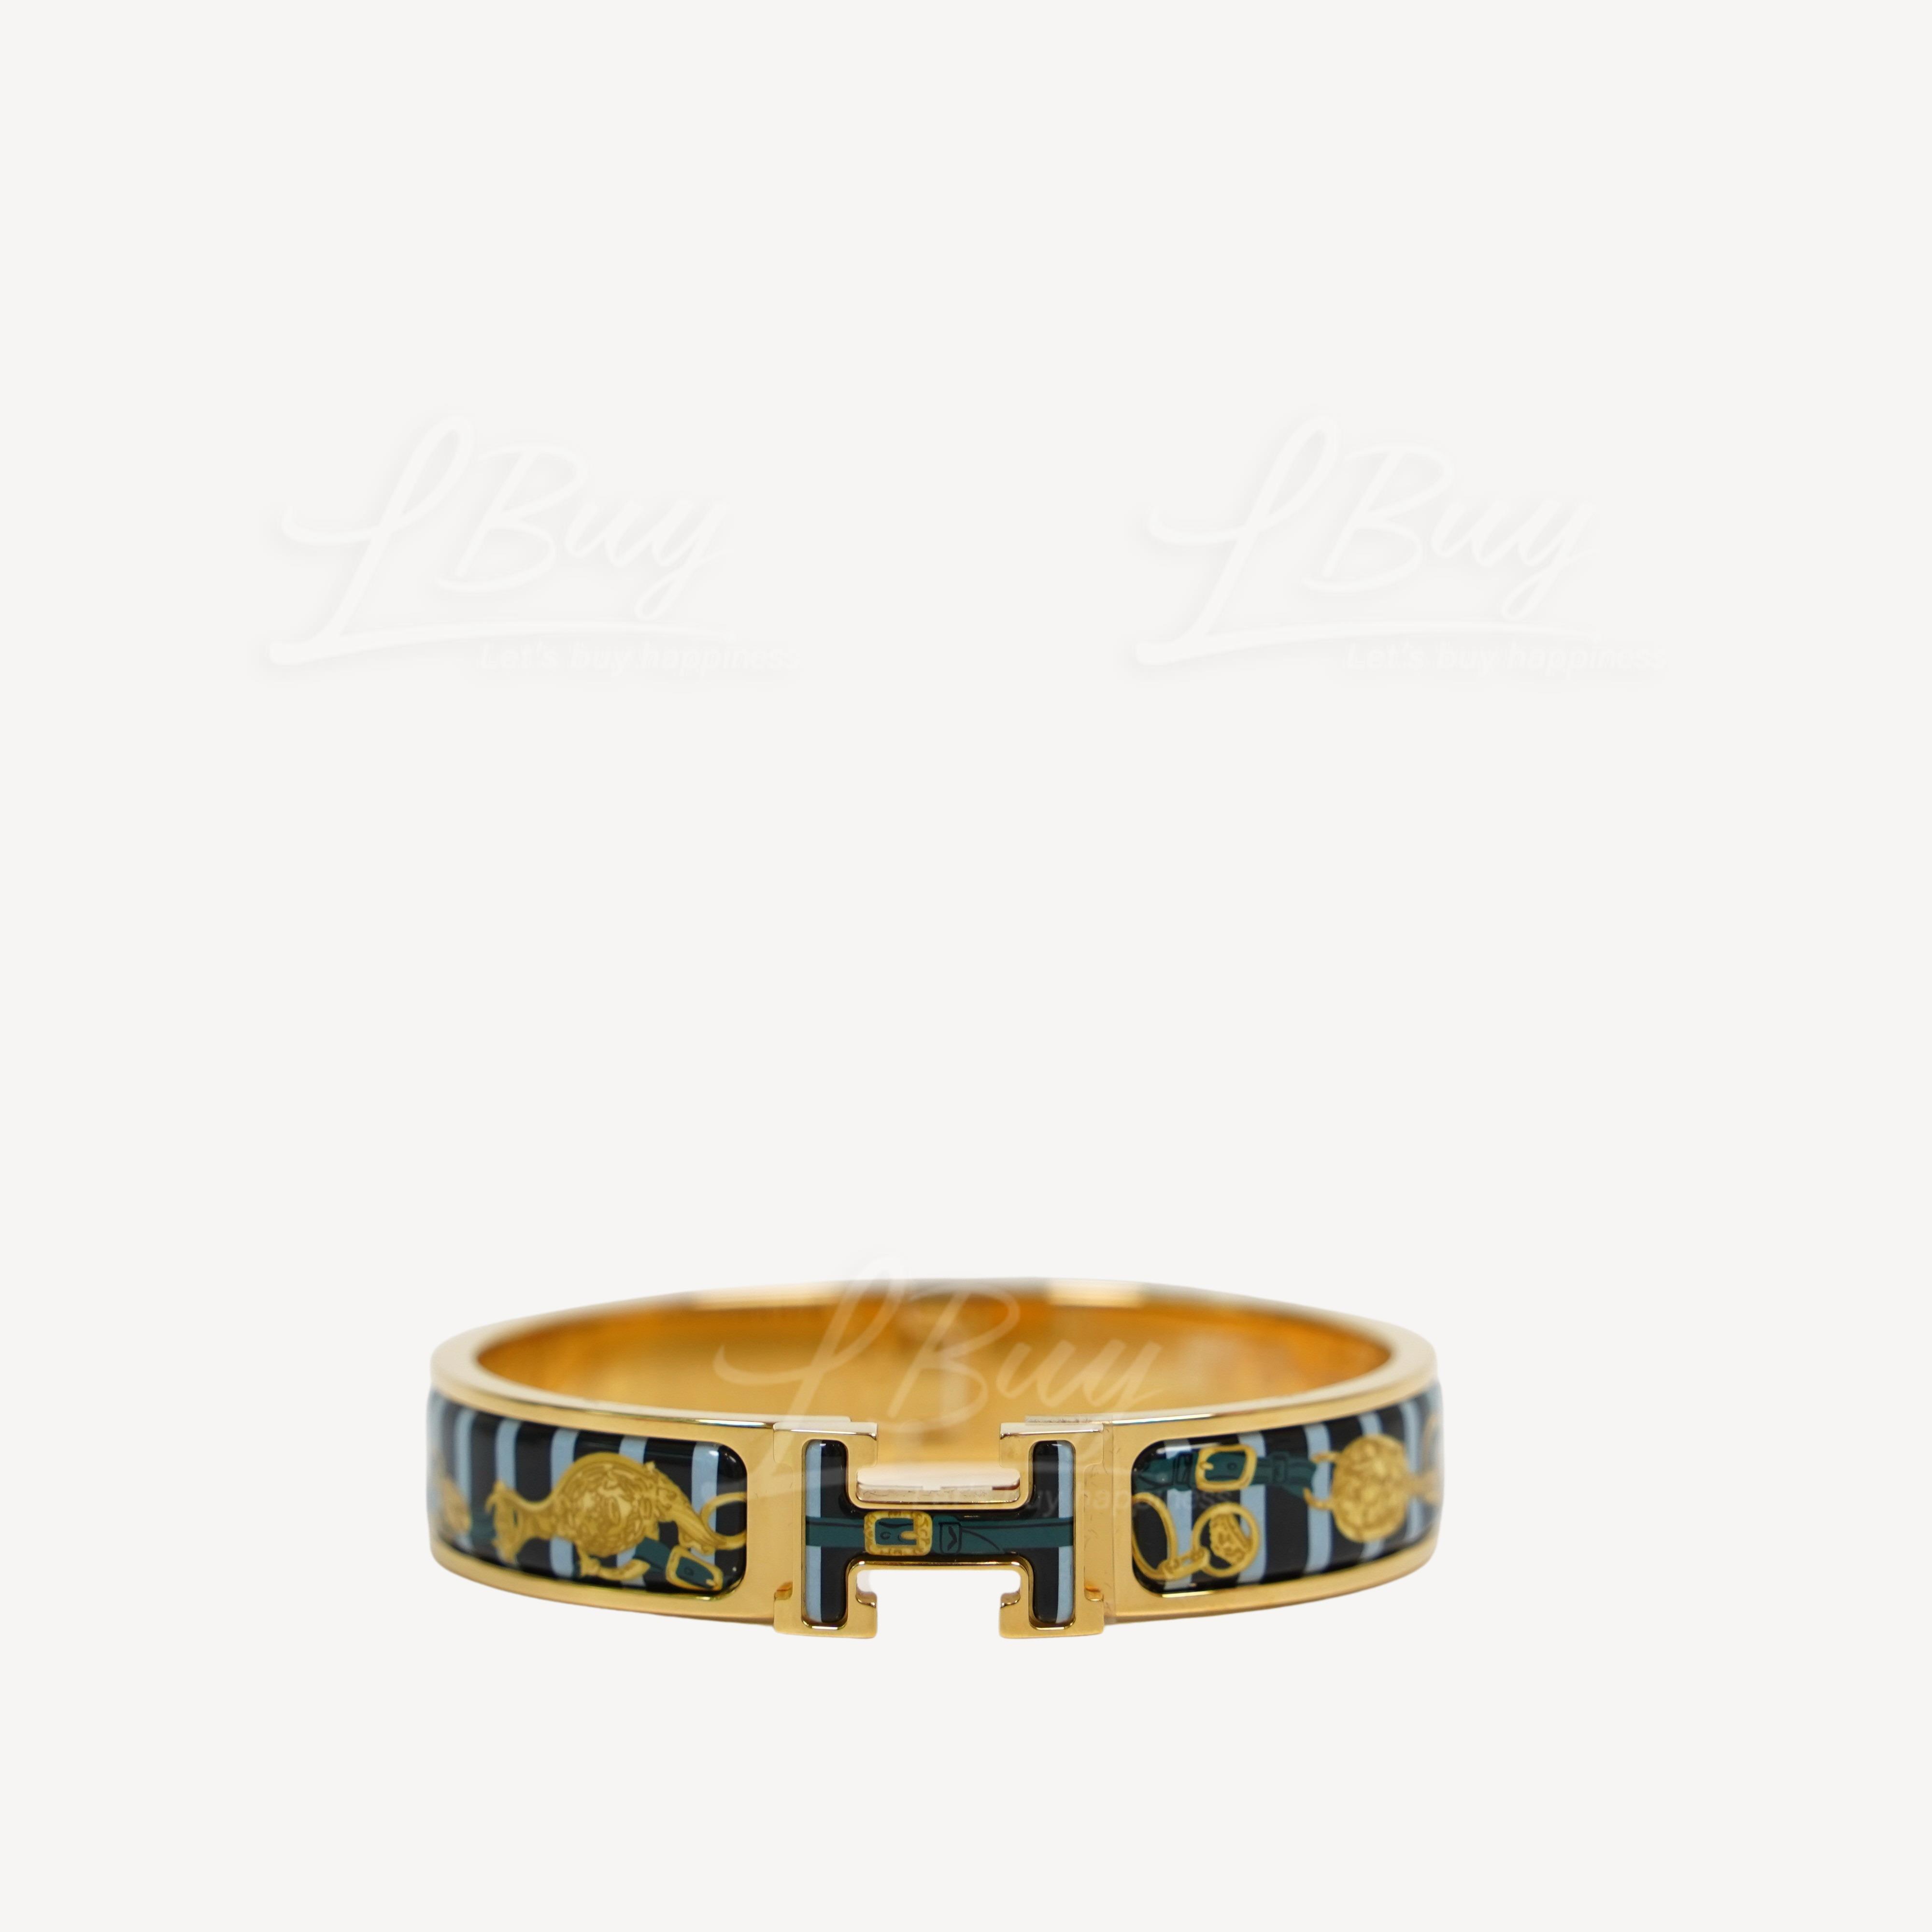 Hermes Clic H Brides de Gala Bayadere bracelet By The Sea Printed Enamel with Gold Plated Hardware